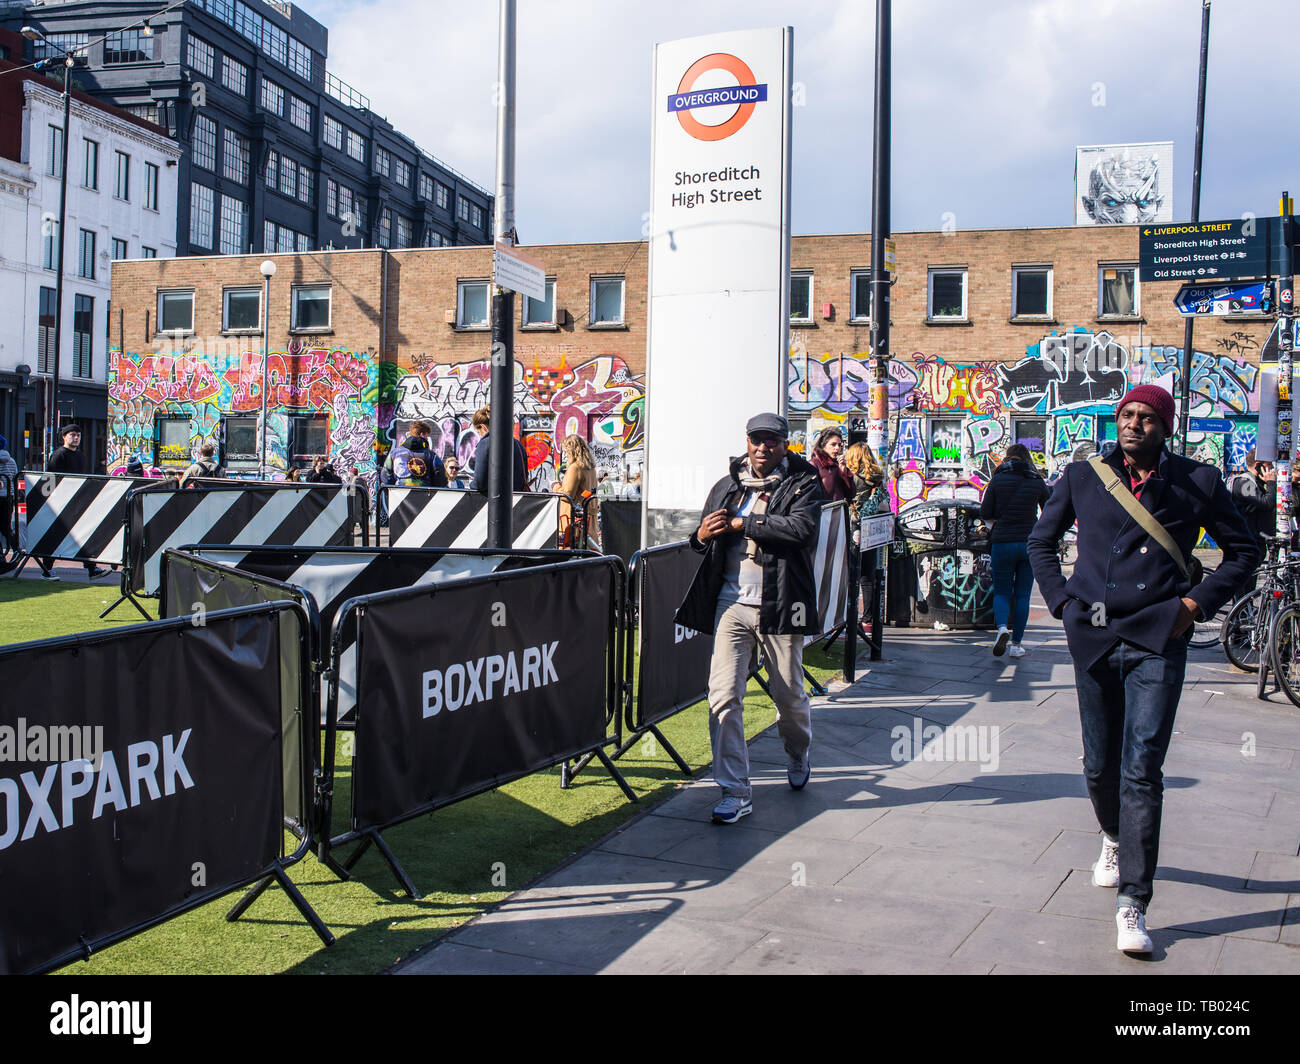 Shoreditch, London, England, UK - April 2019: People walking  near Shoreditch high street station and BOXPARK in Shoreditch East London Stock Photo